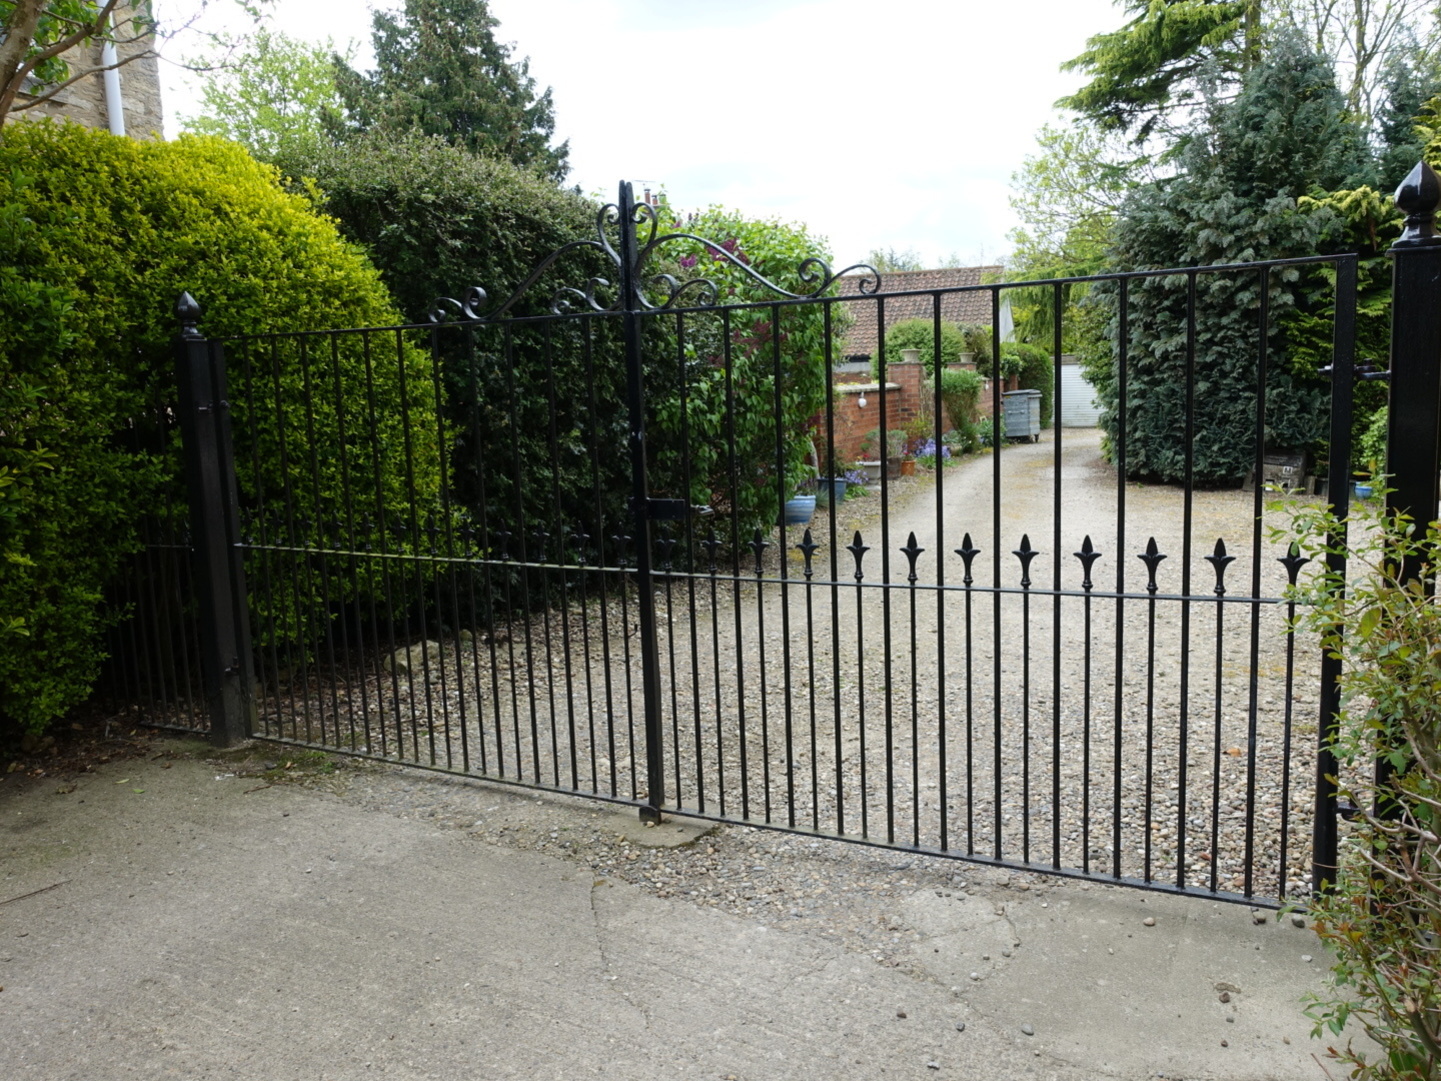 Gates at the entrance to our private car park